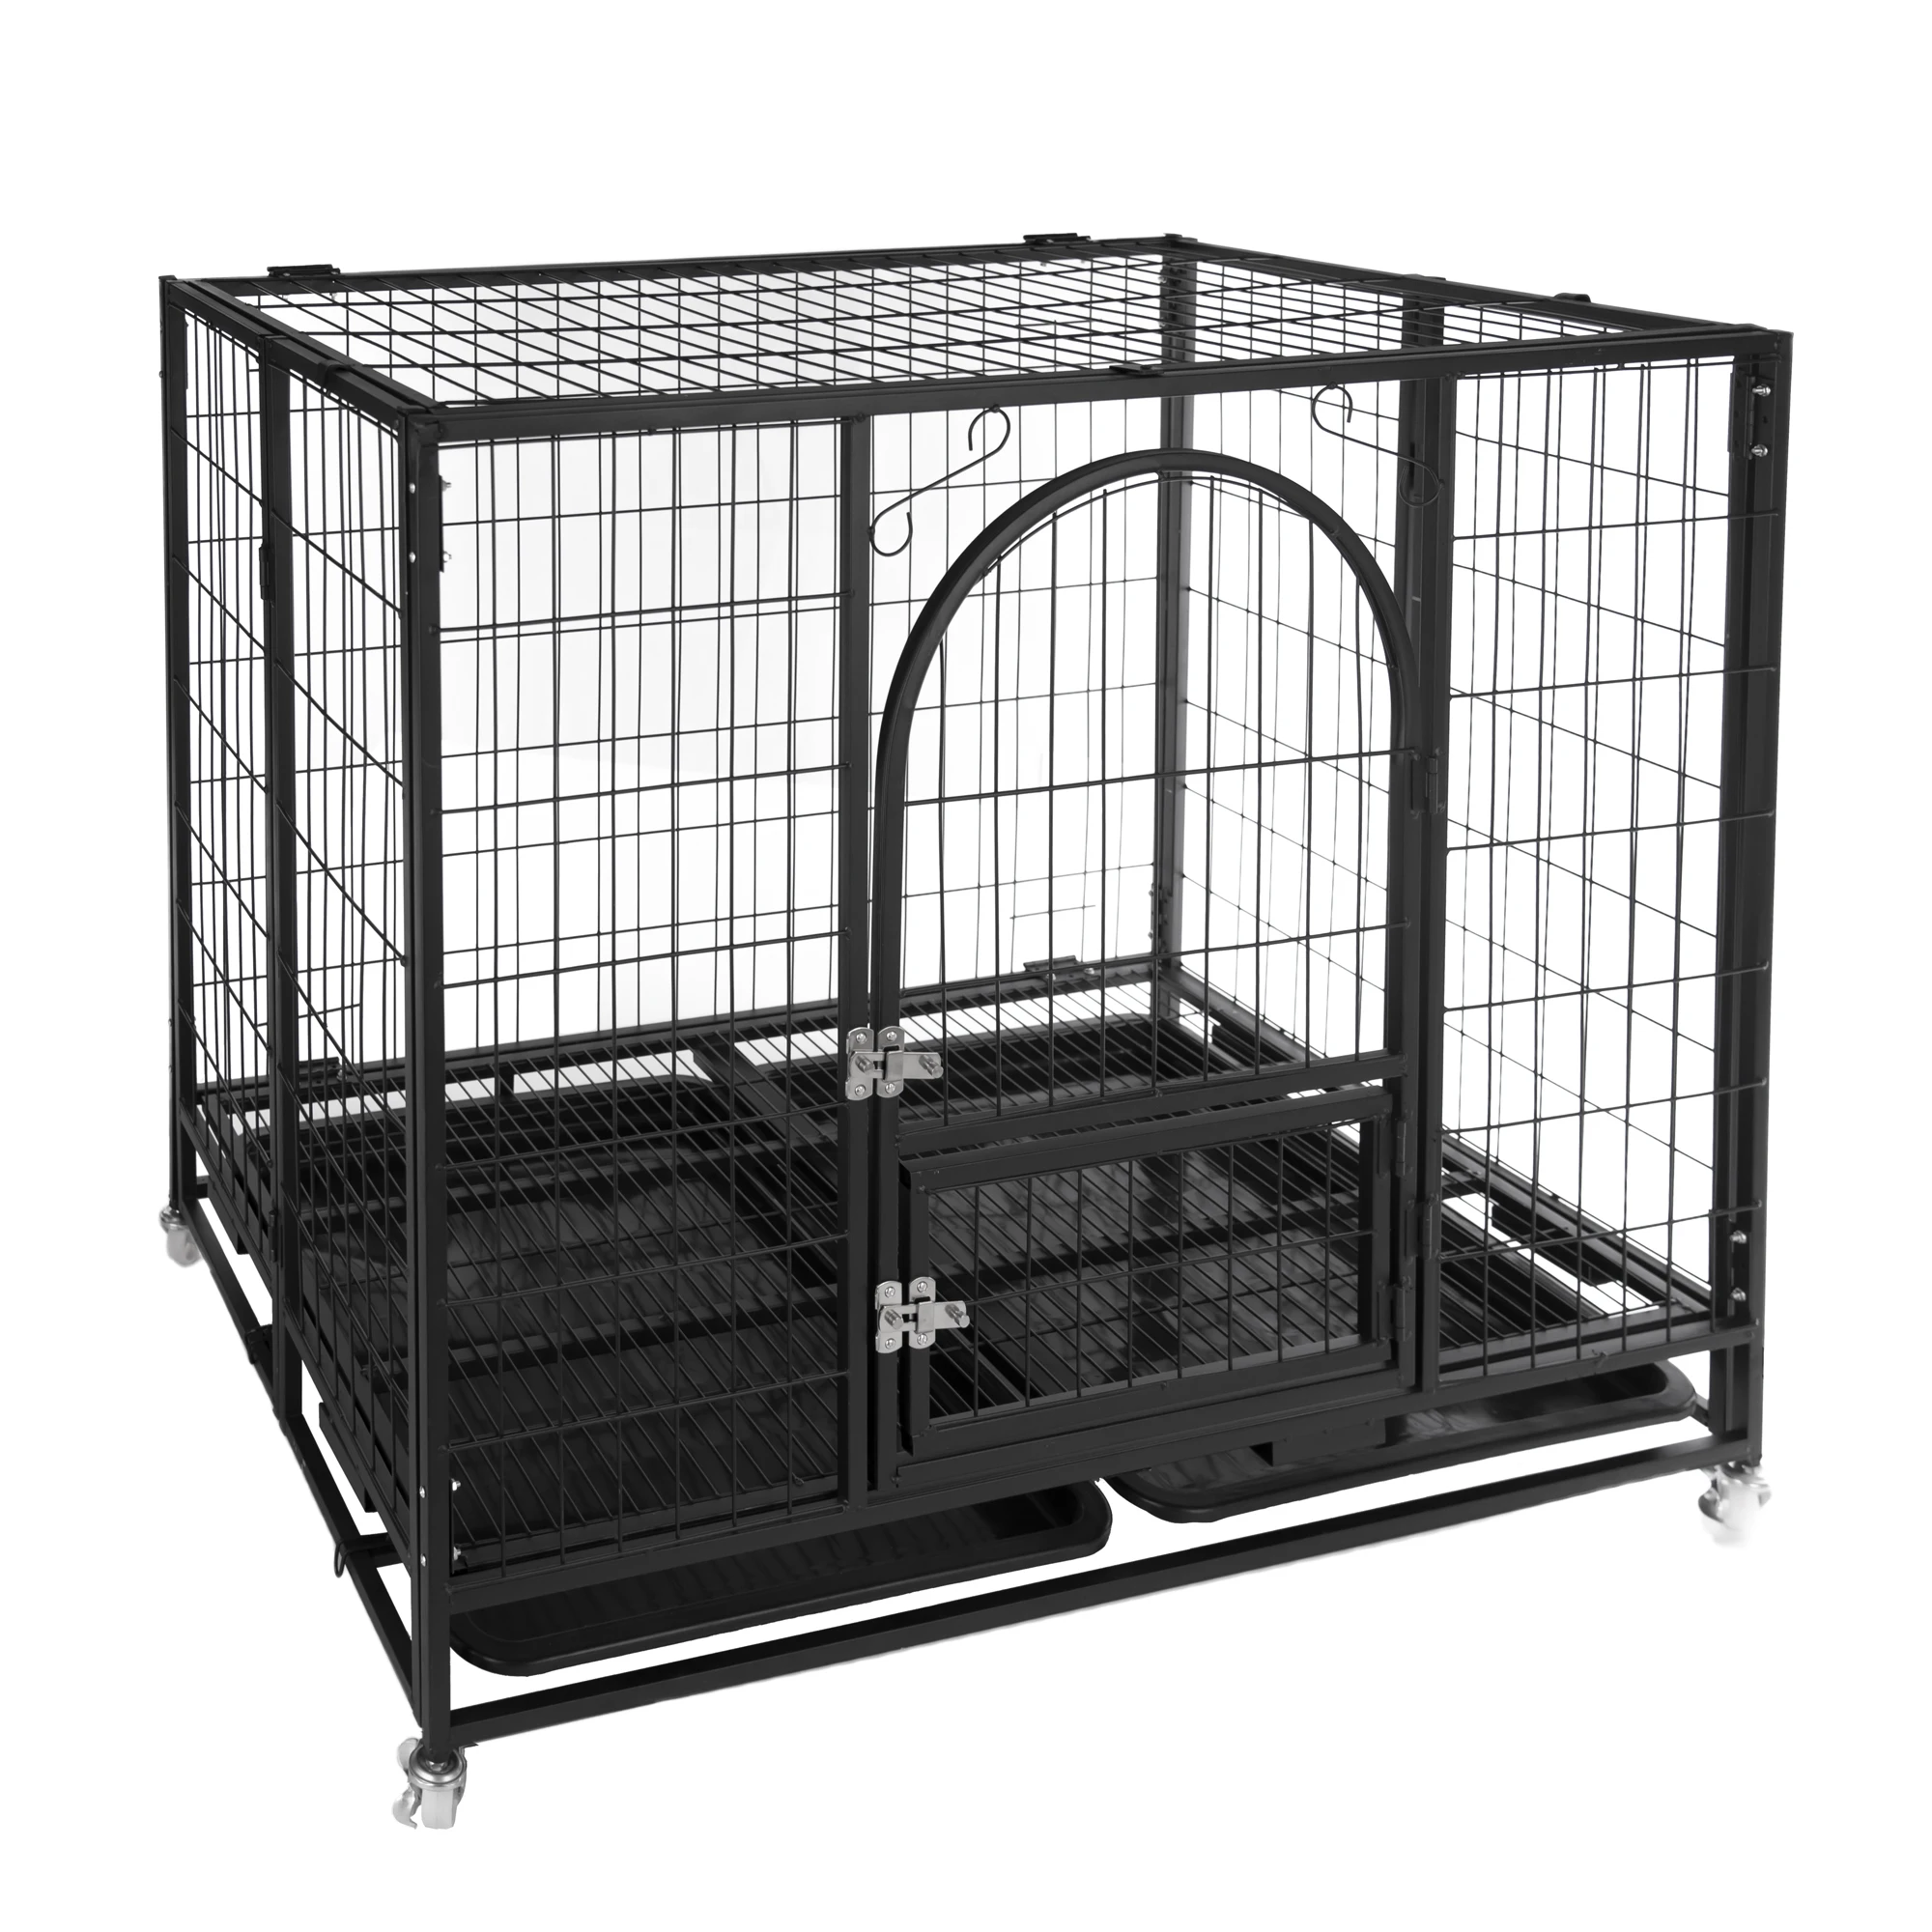 

The Fine Quality Folding Outdoor Heavy Duty Dog Crates Large Dog Cage Metal Dog Cage With Wheels